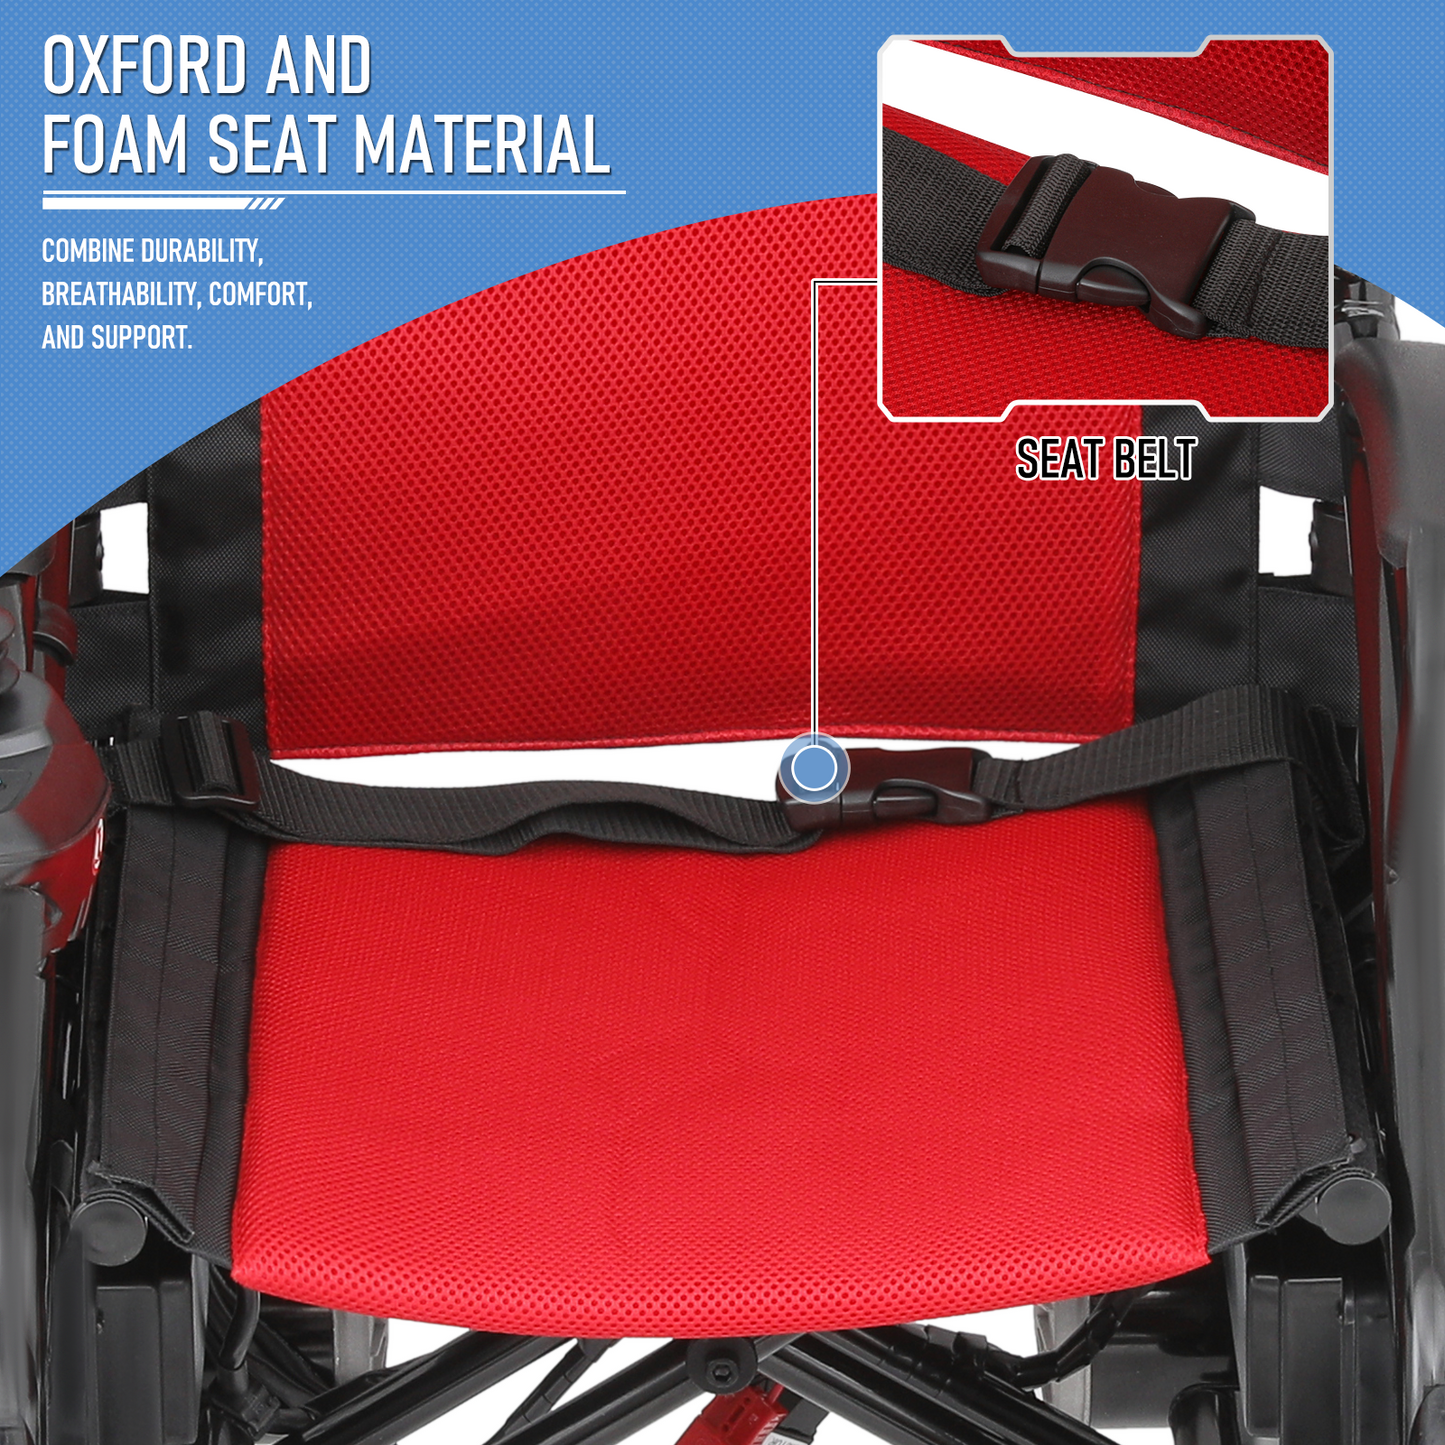 Foldable Electric Wheelchair - 12 Miles of Battery Life - Steel Frame Oxford Seat